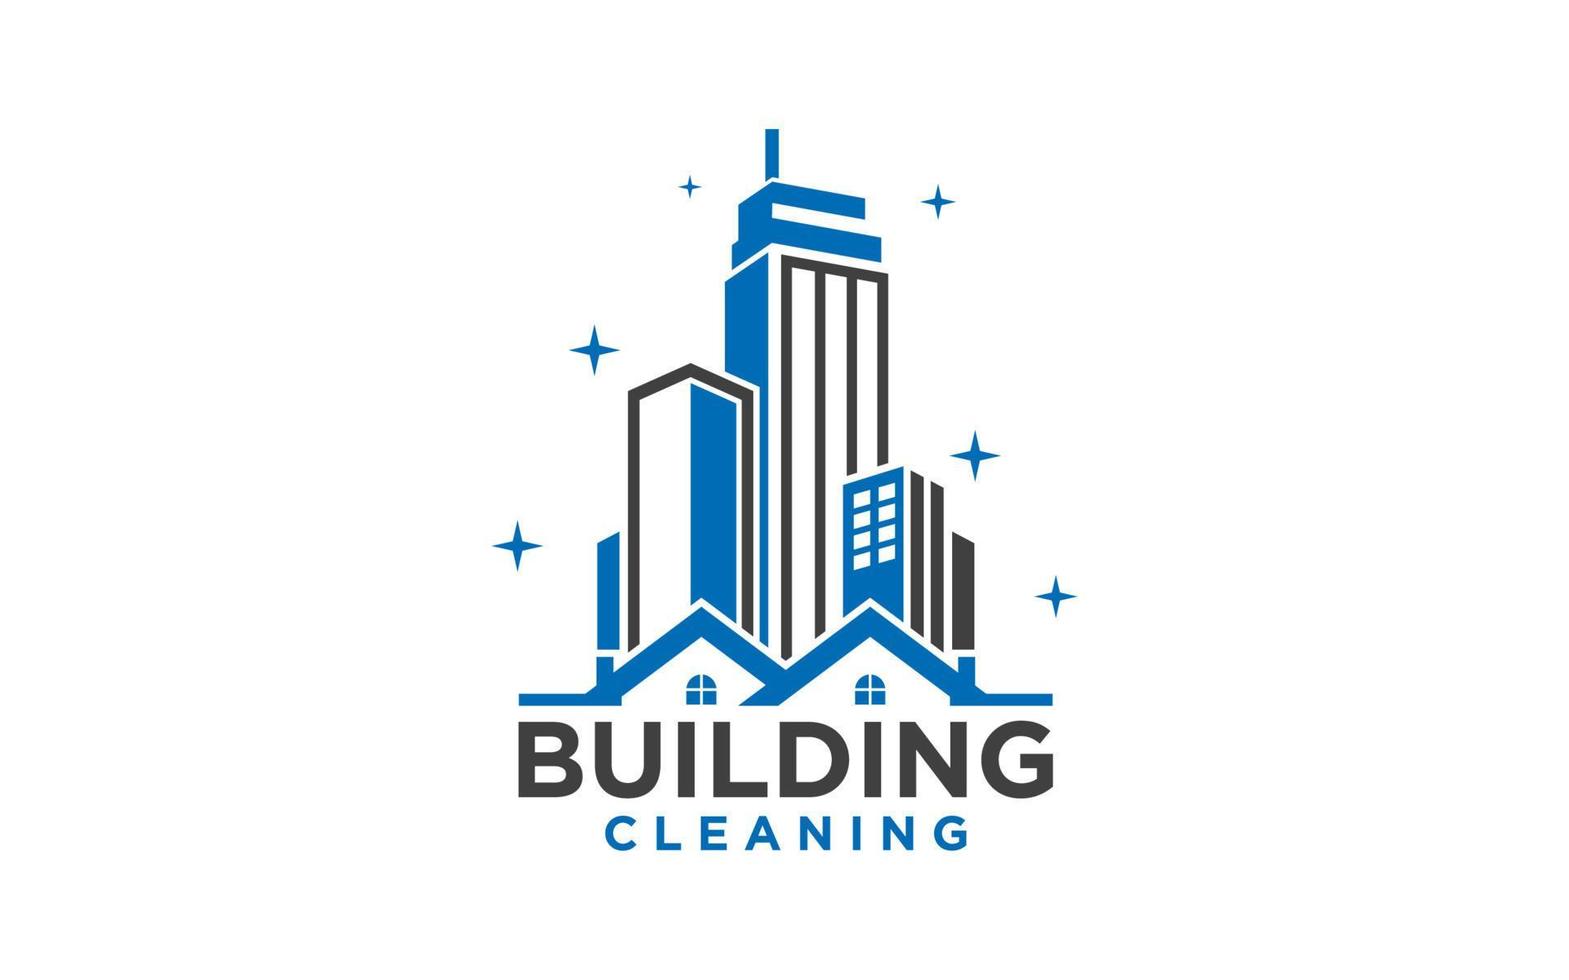 House Building Cleaning Service Business. logo design templates vector